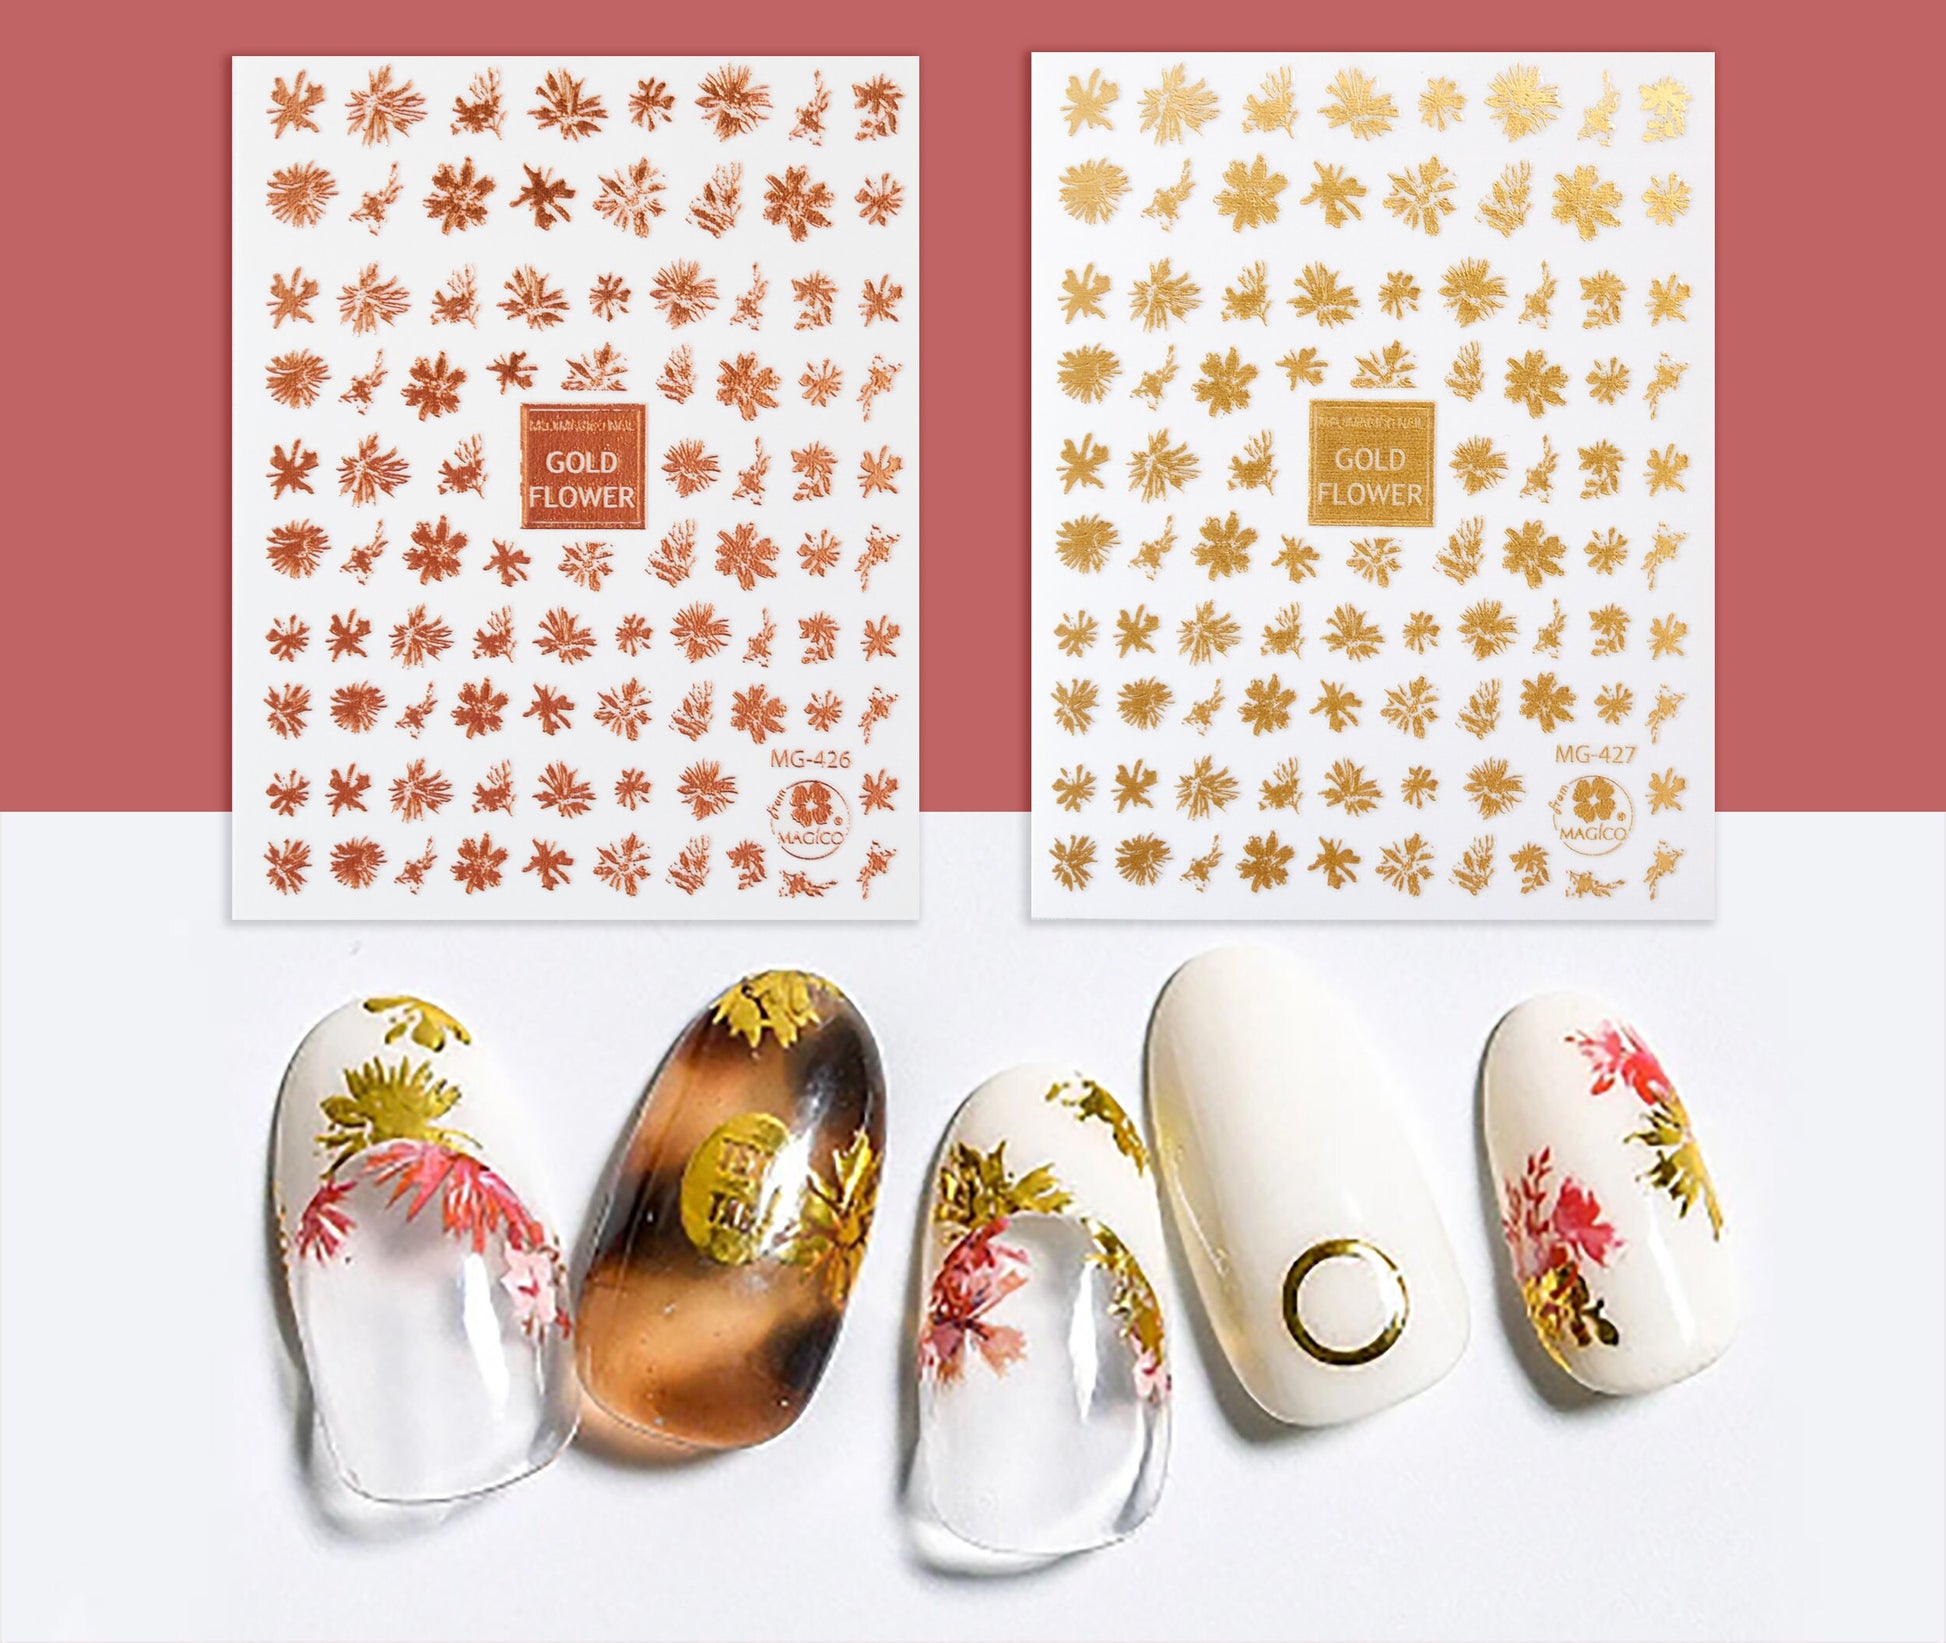 Rose Gold Hibiscus flower Nail Art Sticker/ Metallic DIY Tips Guides Transfer Stickers/ Flower Sticker/ Abstract Floral manicure stencil